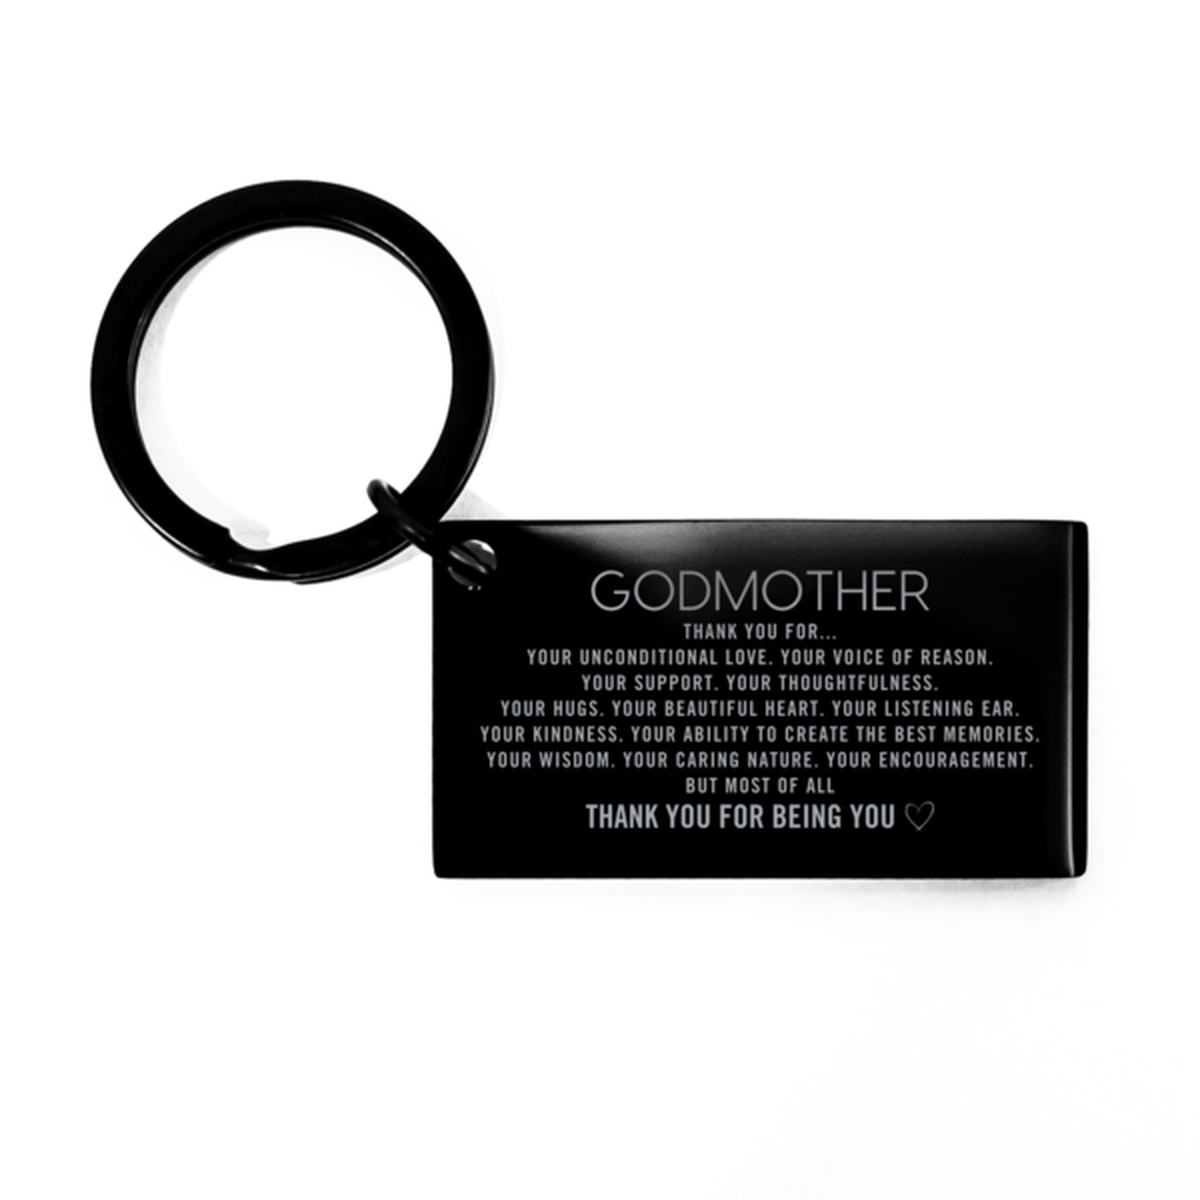 Godmother Keychain Custom, Engraved Gifts For Godmother Christmas Graduation Birthday Gifts for Men Women Godmother Thank you for Your unconditional love